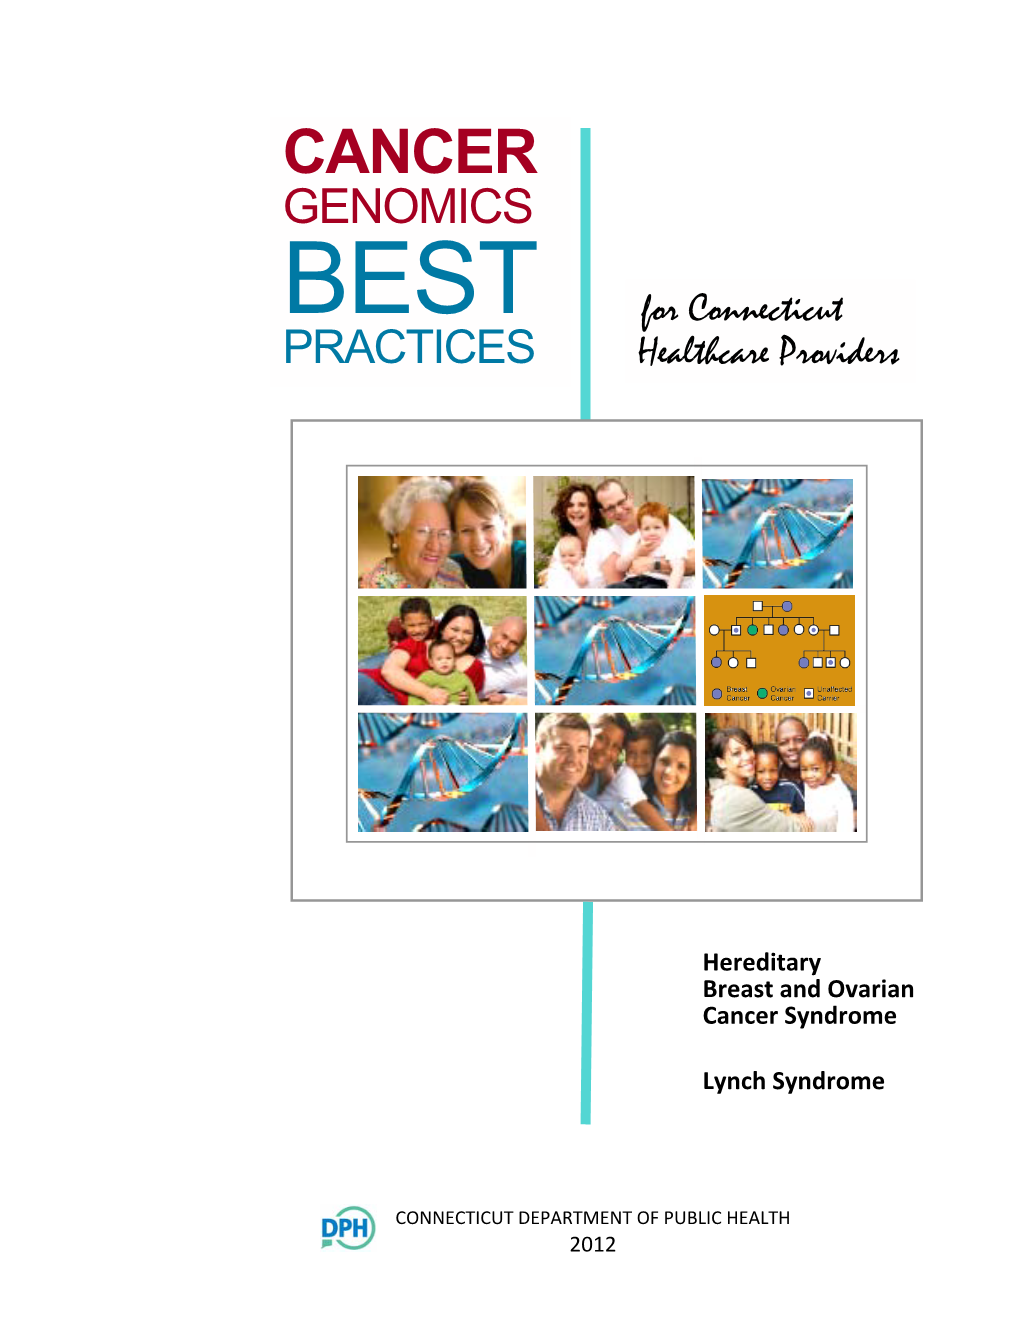 CANCER GENOMICS BEST PRACTICES for Connecticut Healthcare Providers